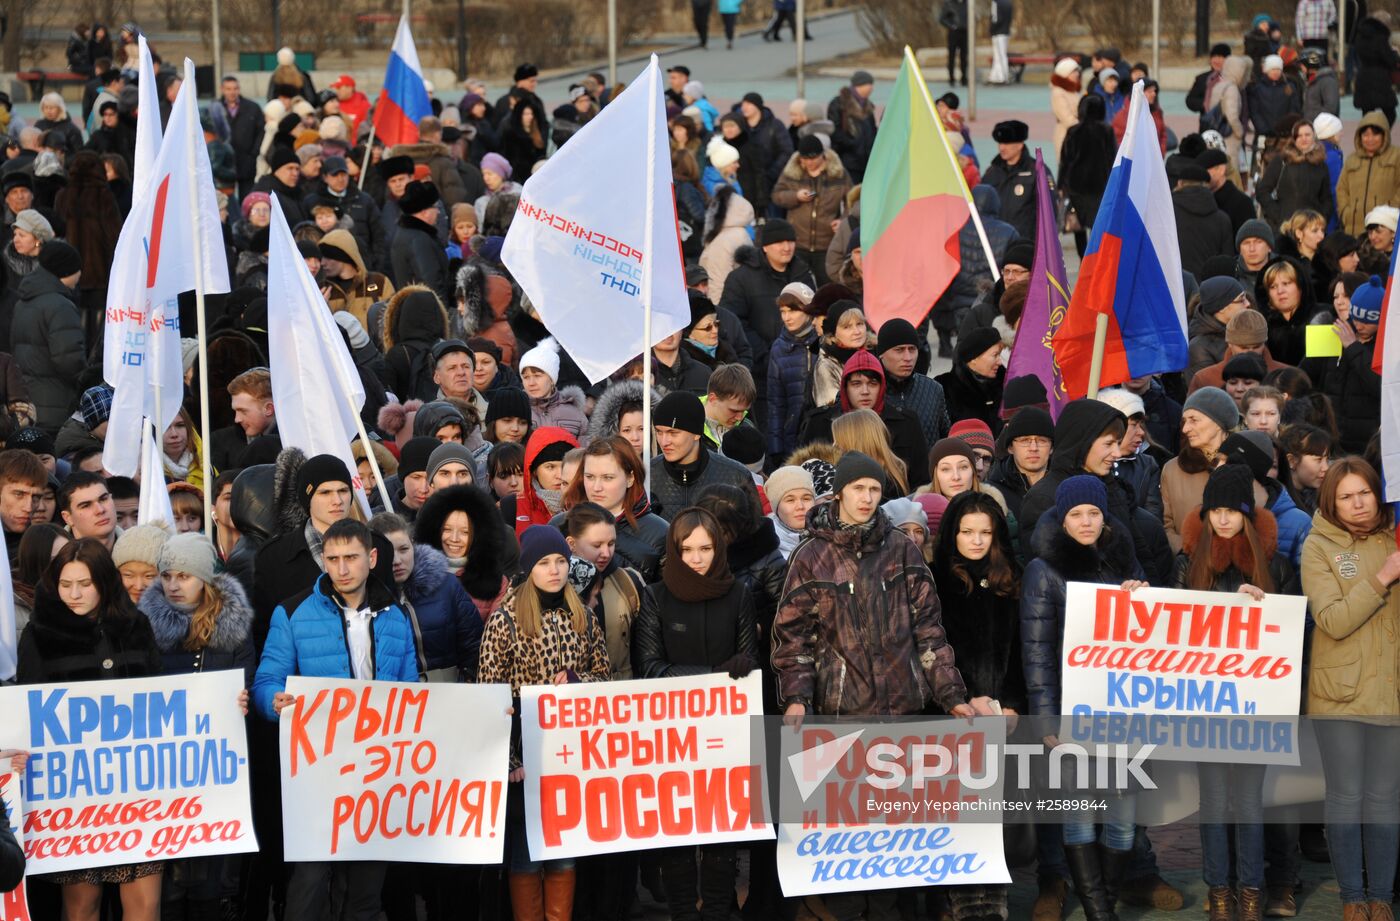 Reunification campaign across Russia